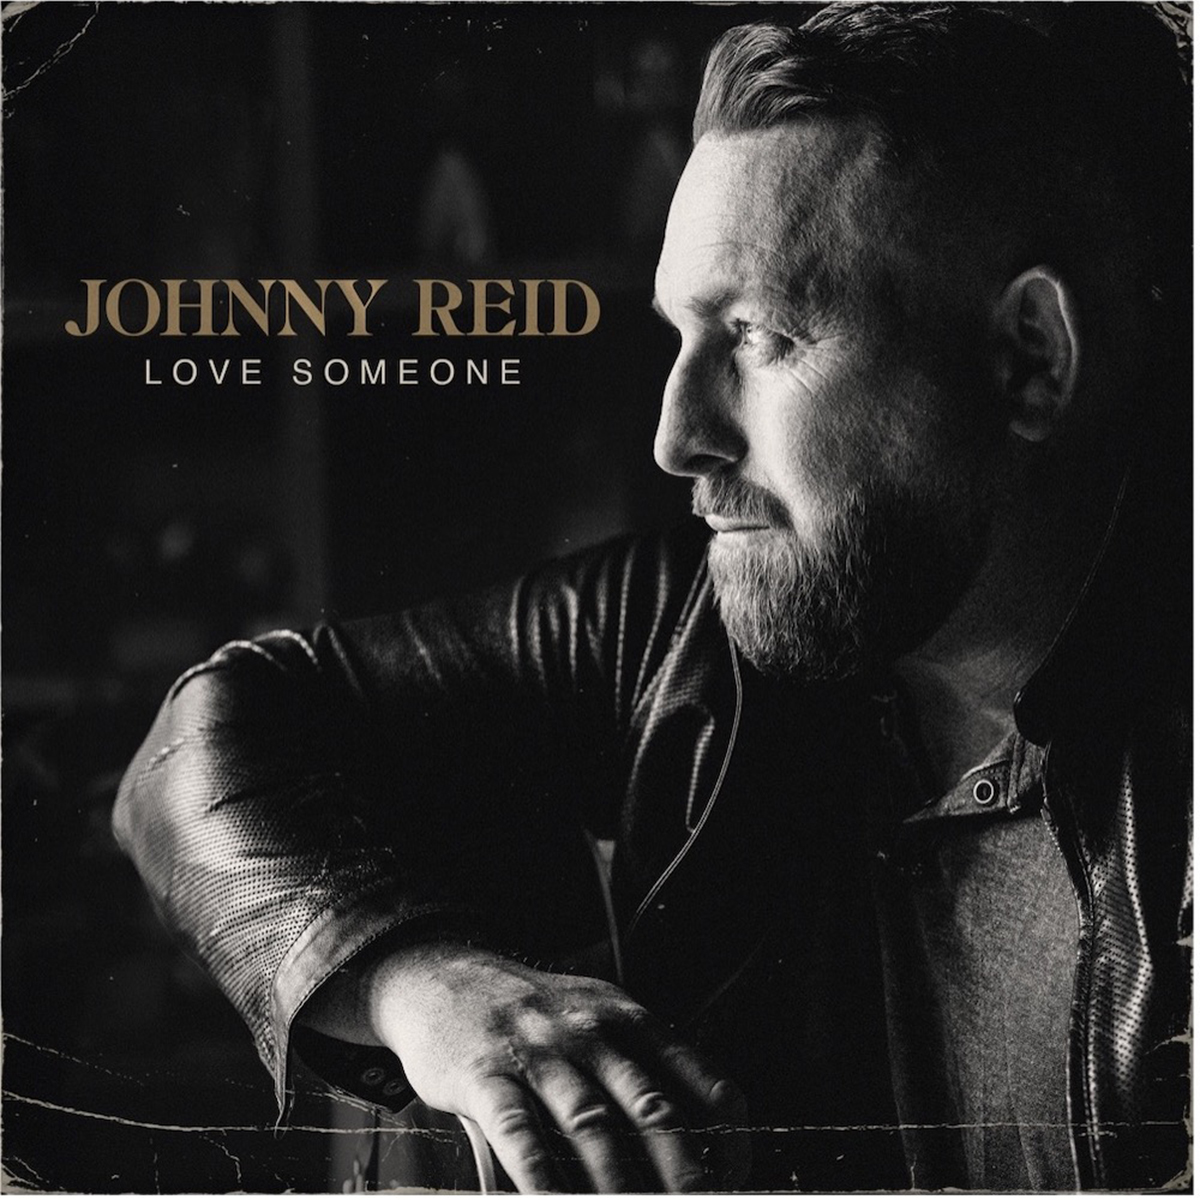 Johnny Reid Lifts Doom And Gloom With Positive Lyrical Messages